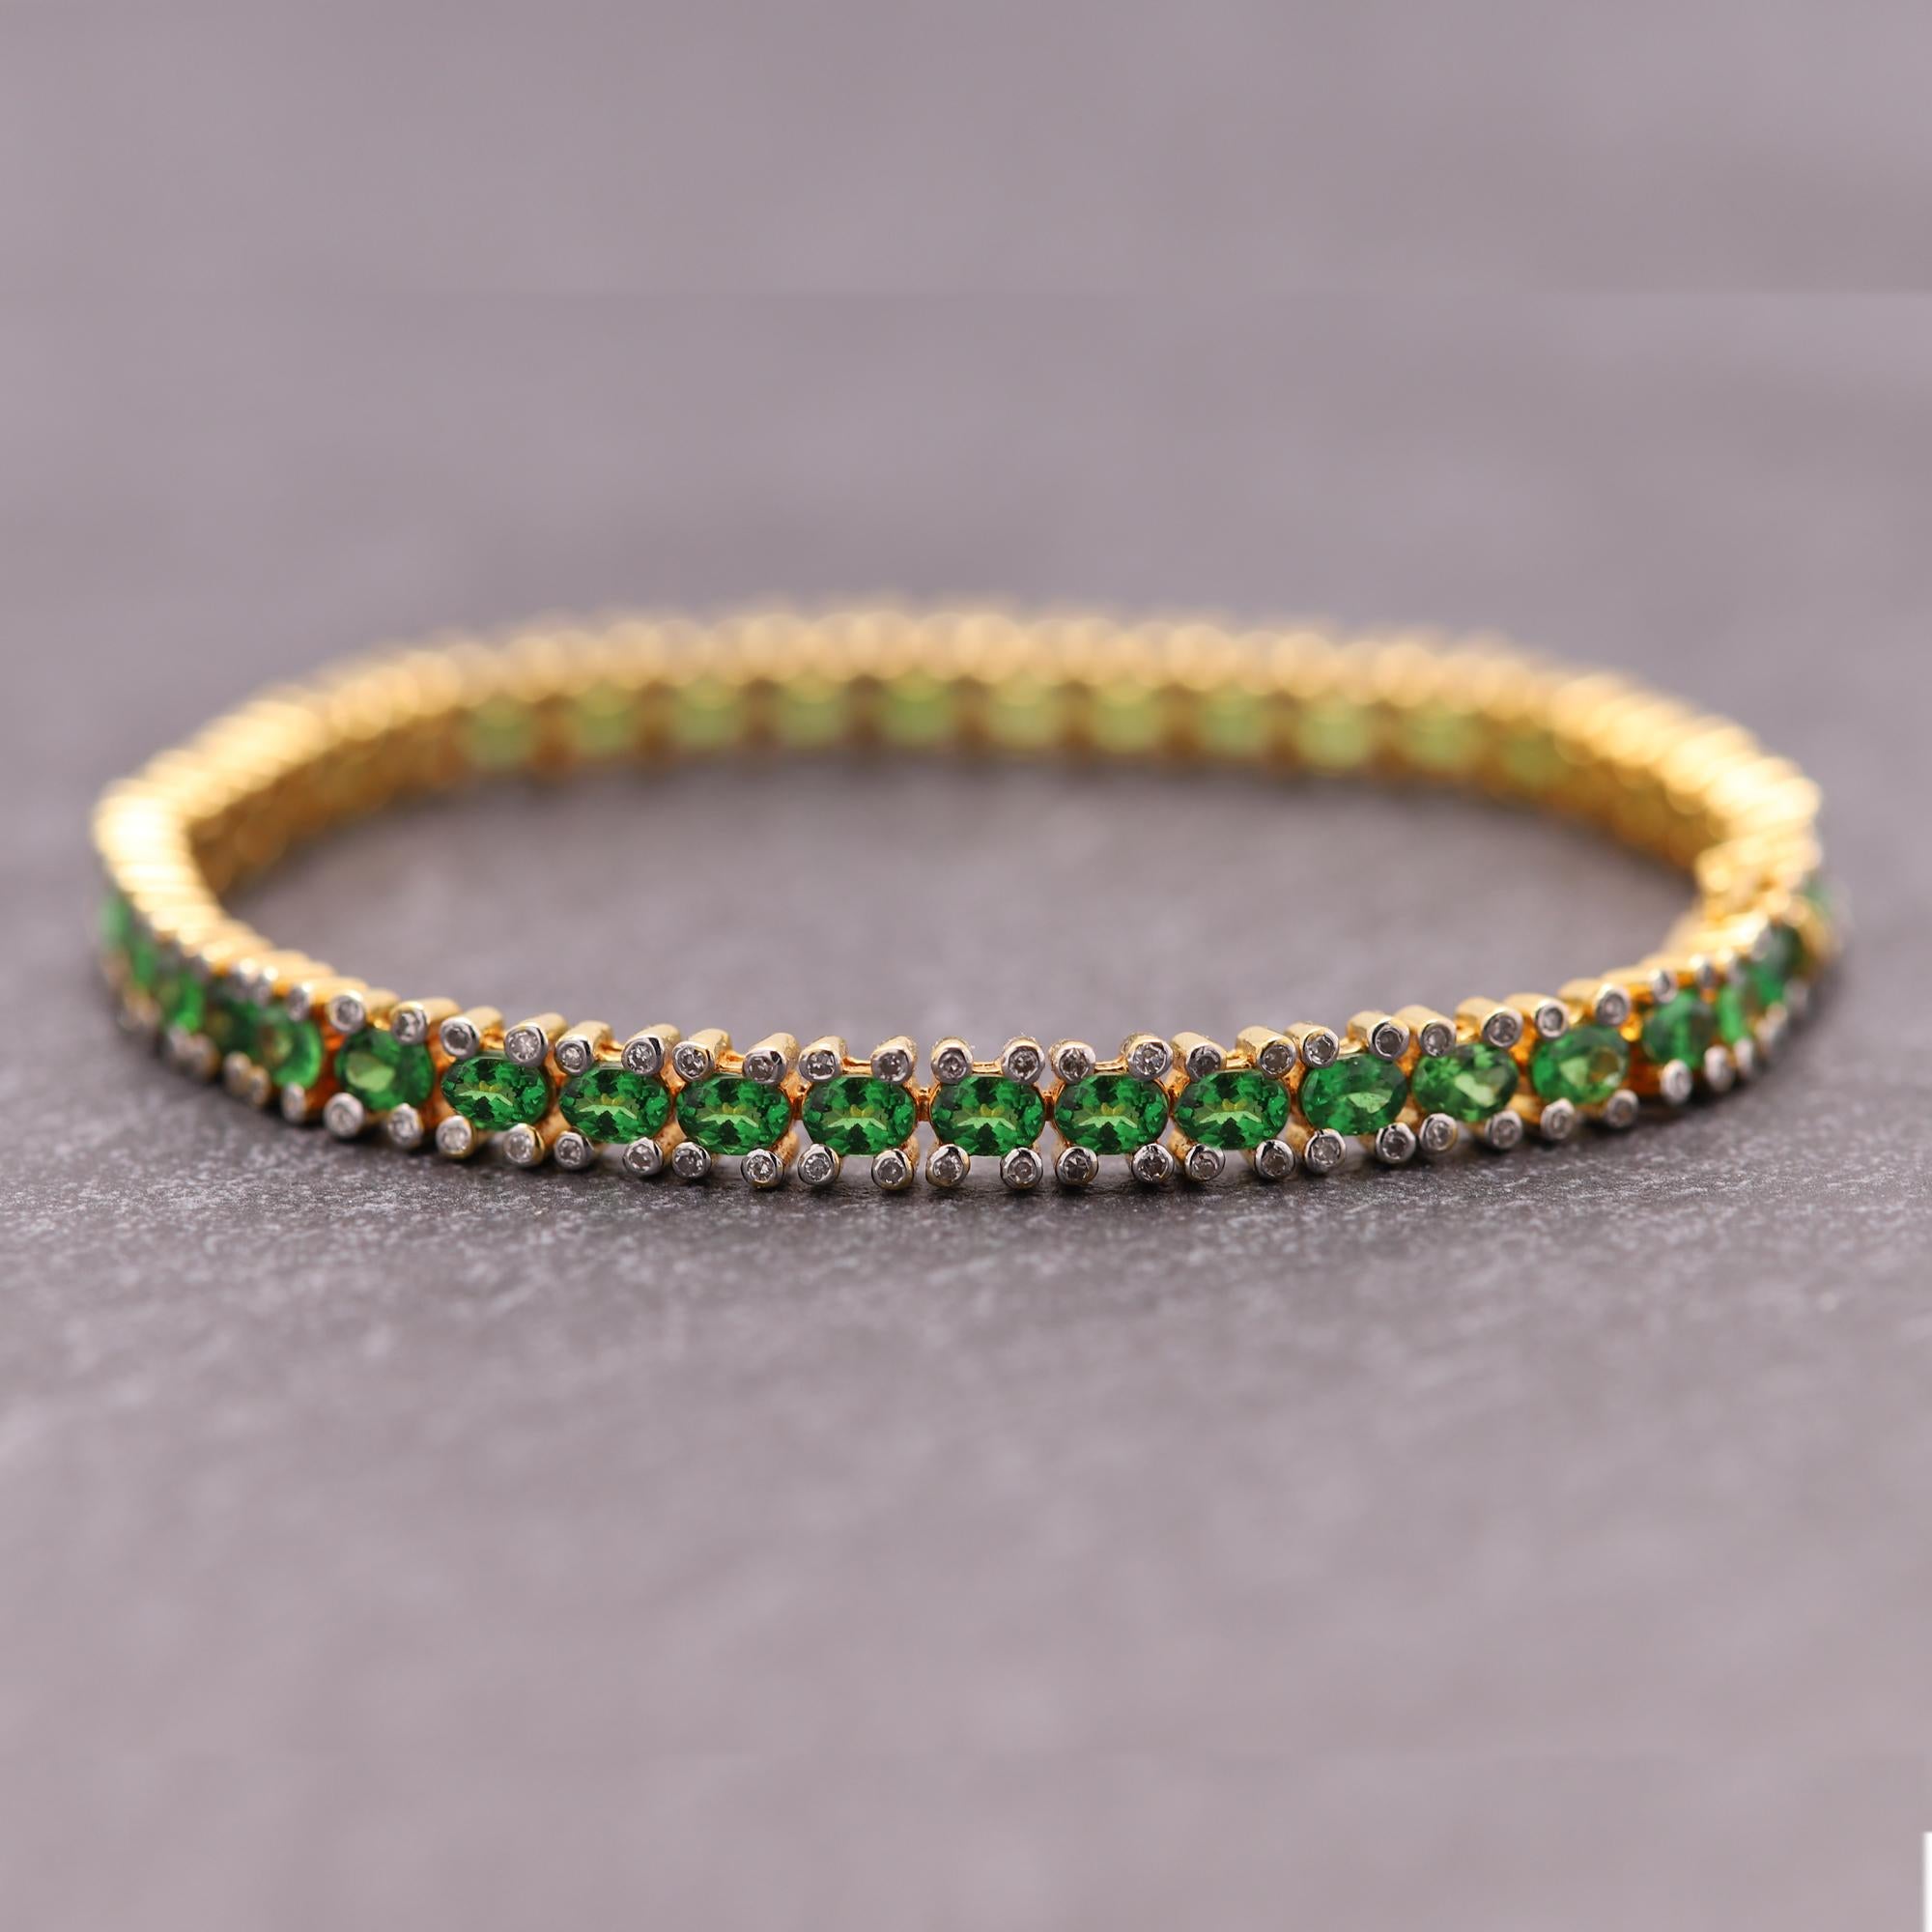 Brilliant Green Gemstones of Green Tsavorite set in
14k Yellow Gold (top area is white Gold) approx 15.0 grams.
all stones are natural !
total tsavorite 42 stones - approx  8.40 carat AAA
Total Diamonds approx 0.90 carat H-I-I1
Bracelet Length 7.25'